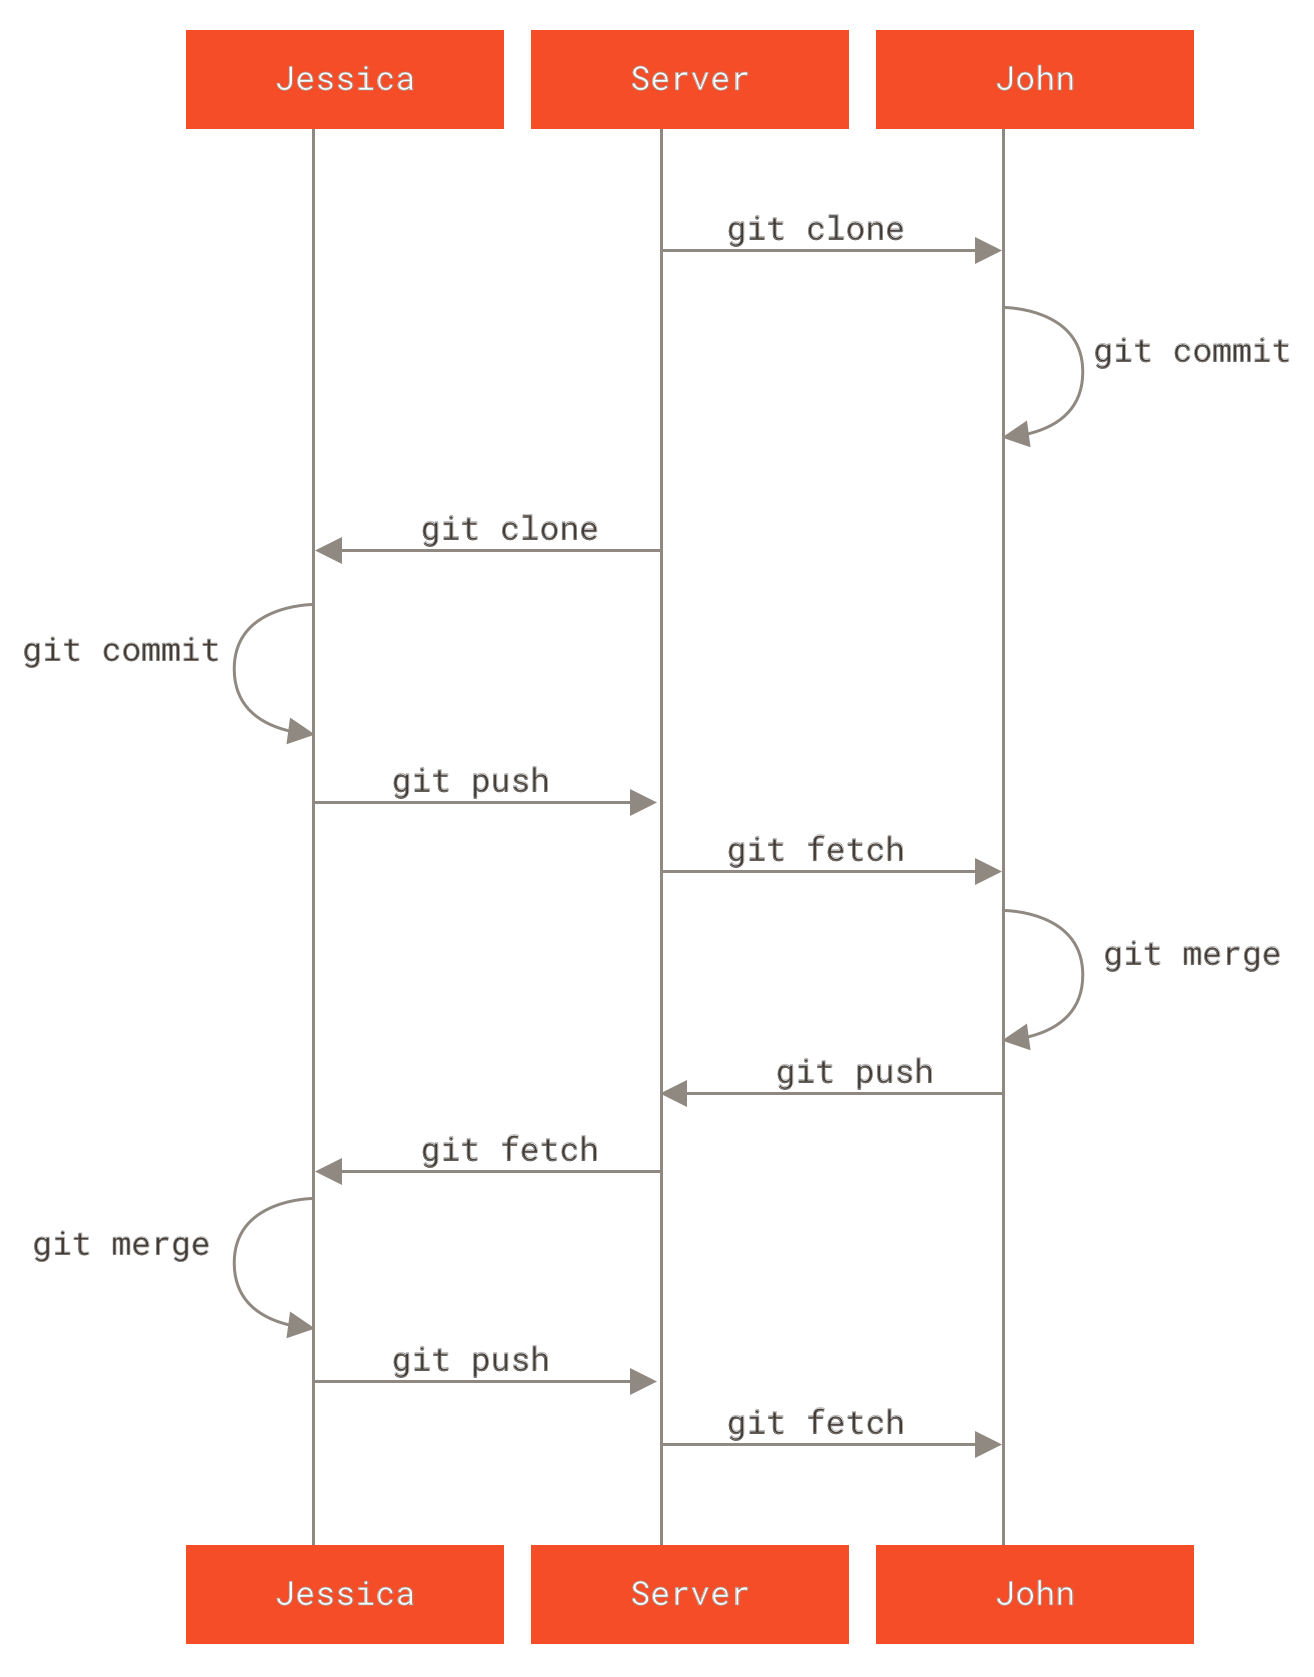 General sequence of events for a simple multiple-developer Git workflow